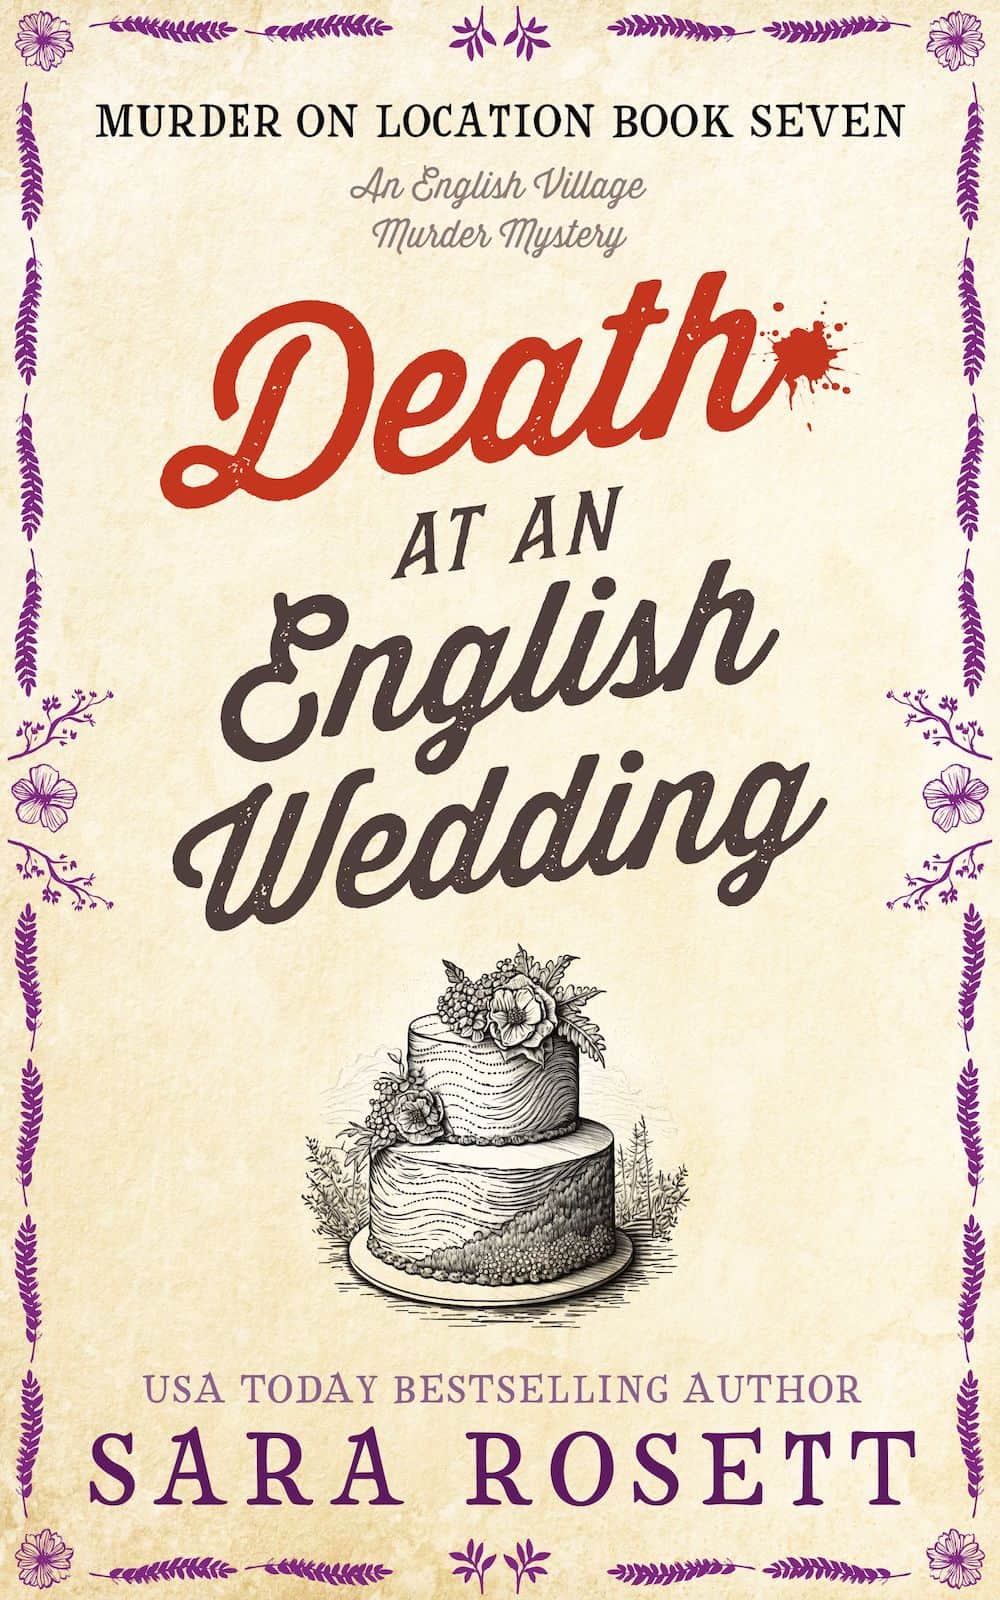 Cover of Death at an English Wedding, by Sara Rosett, a fun English village mystery set that combines a whodunit with Jane Austen